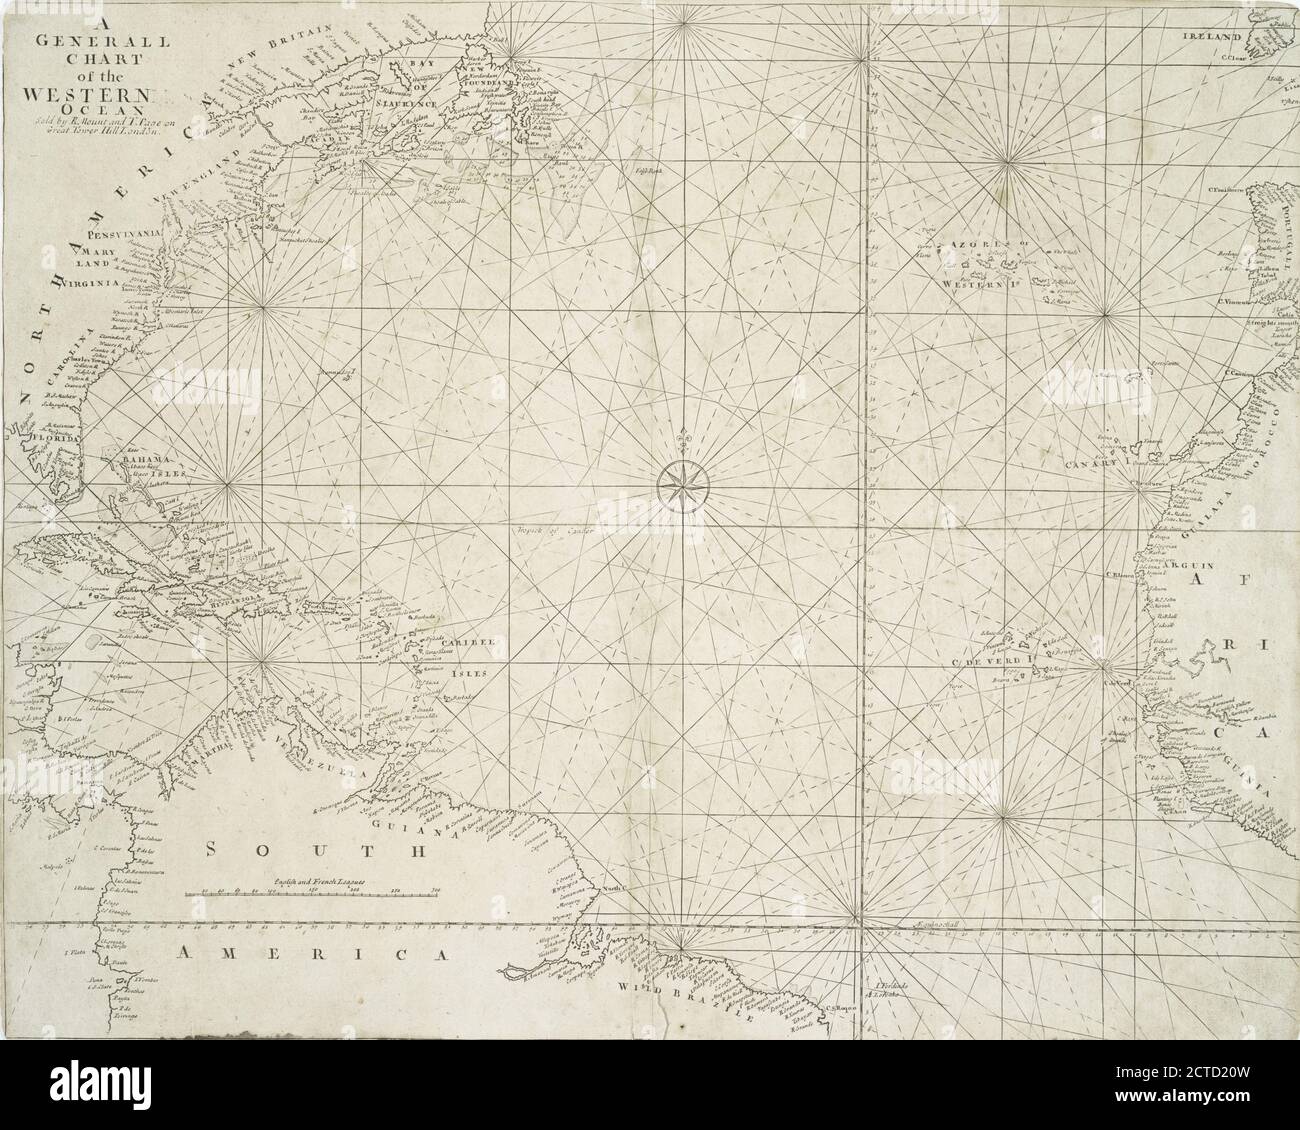 A Generall chart of the Western Ocean., cartographic, Maps, 1713 Stock Photo